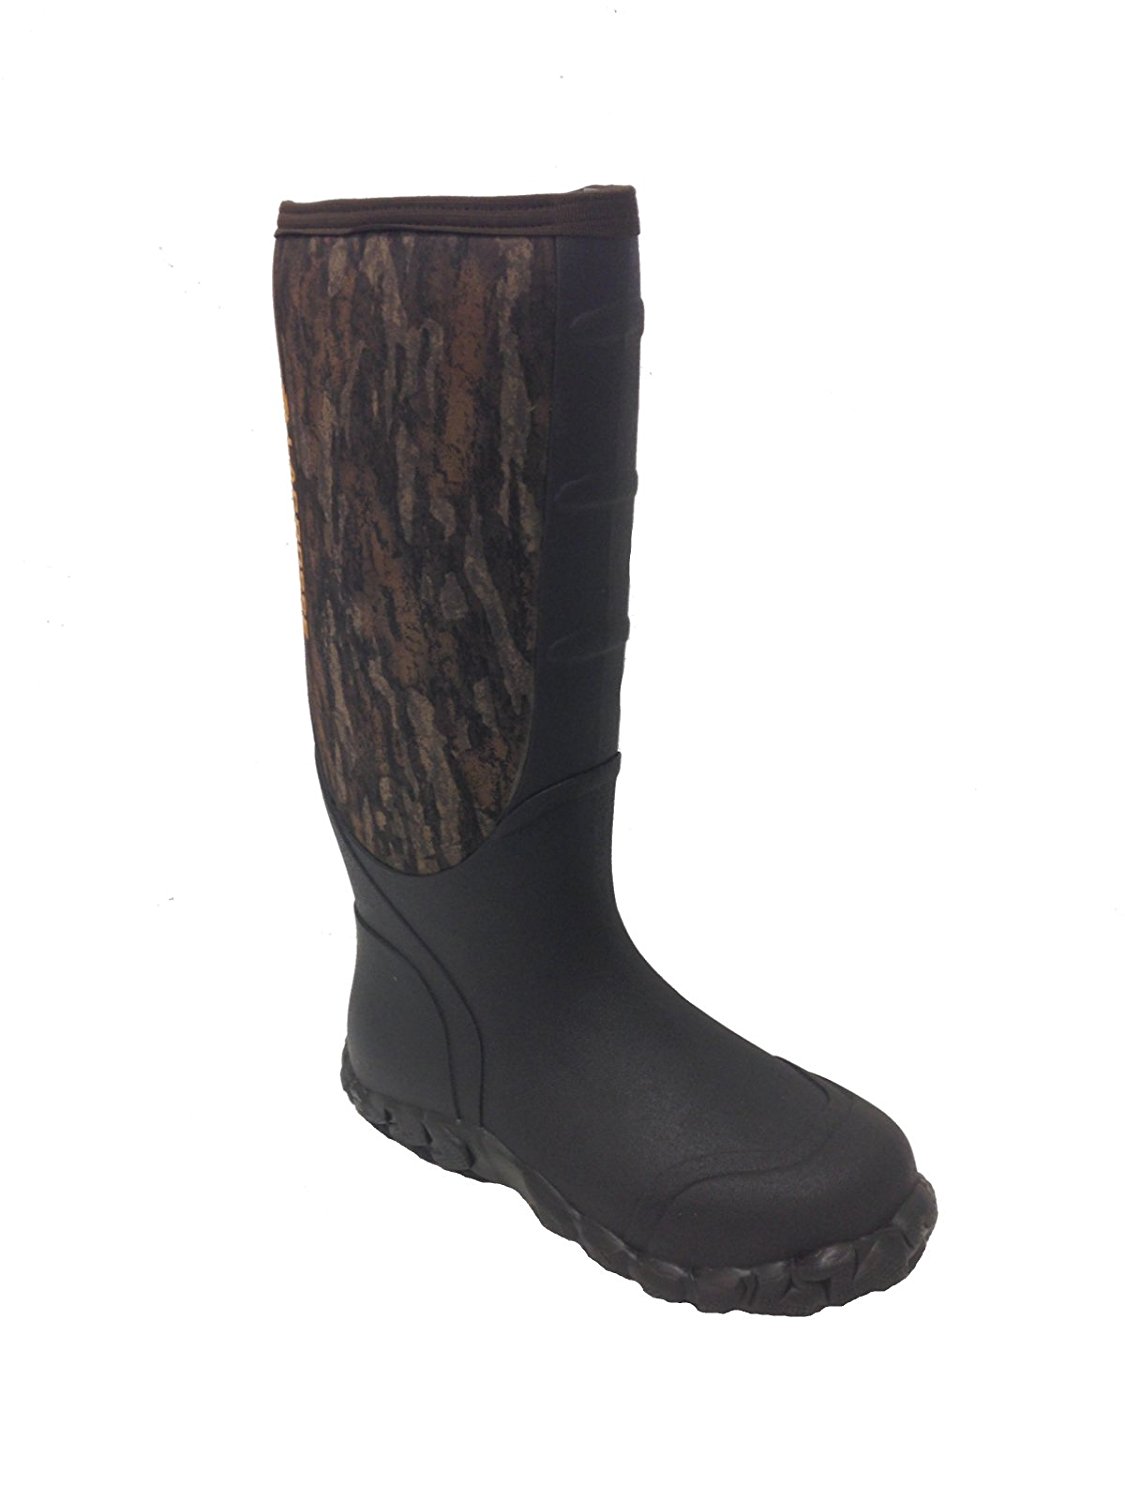 lacrosse bottomland boots